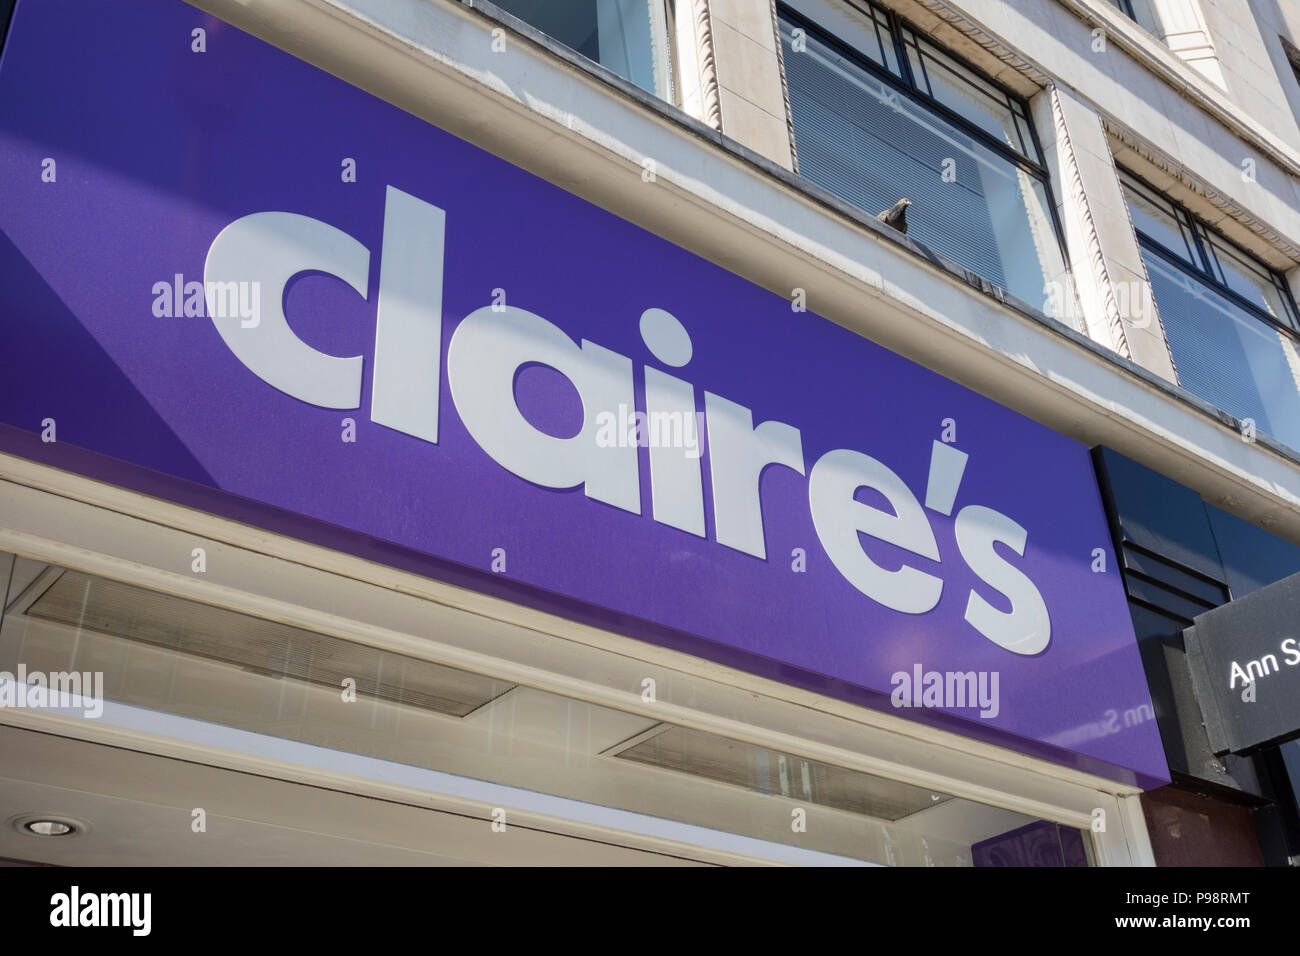 Claire's Accessories on Oxford Street, London, UK Stock Photo